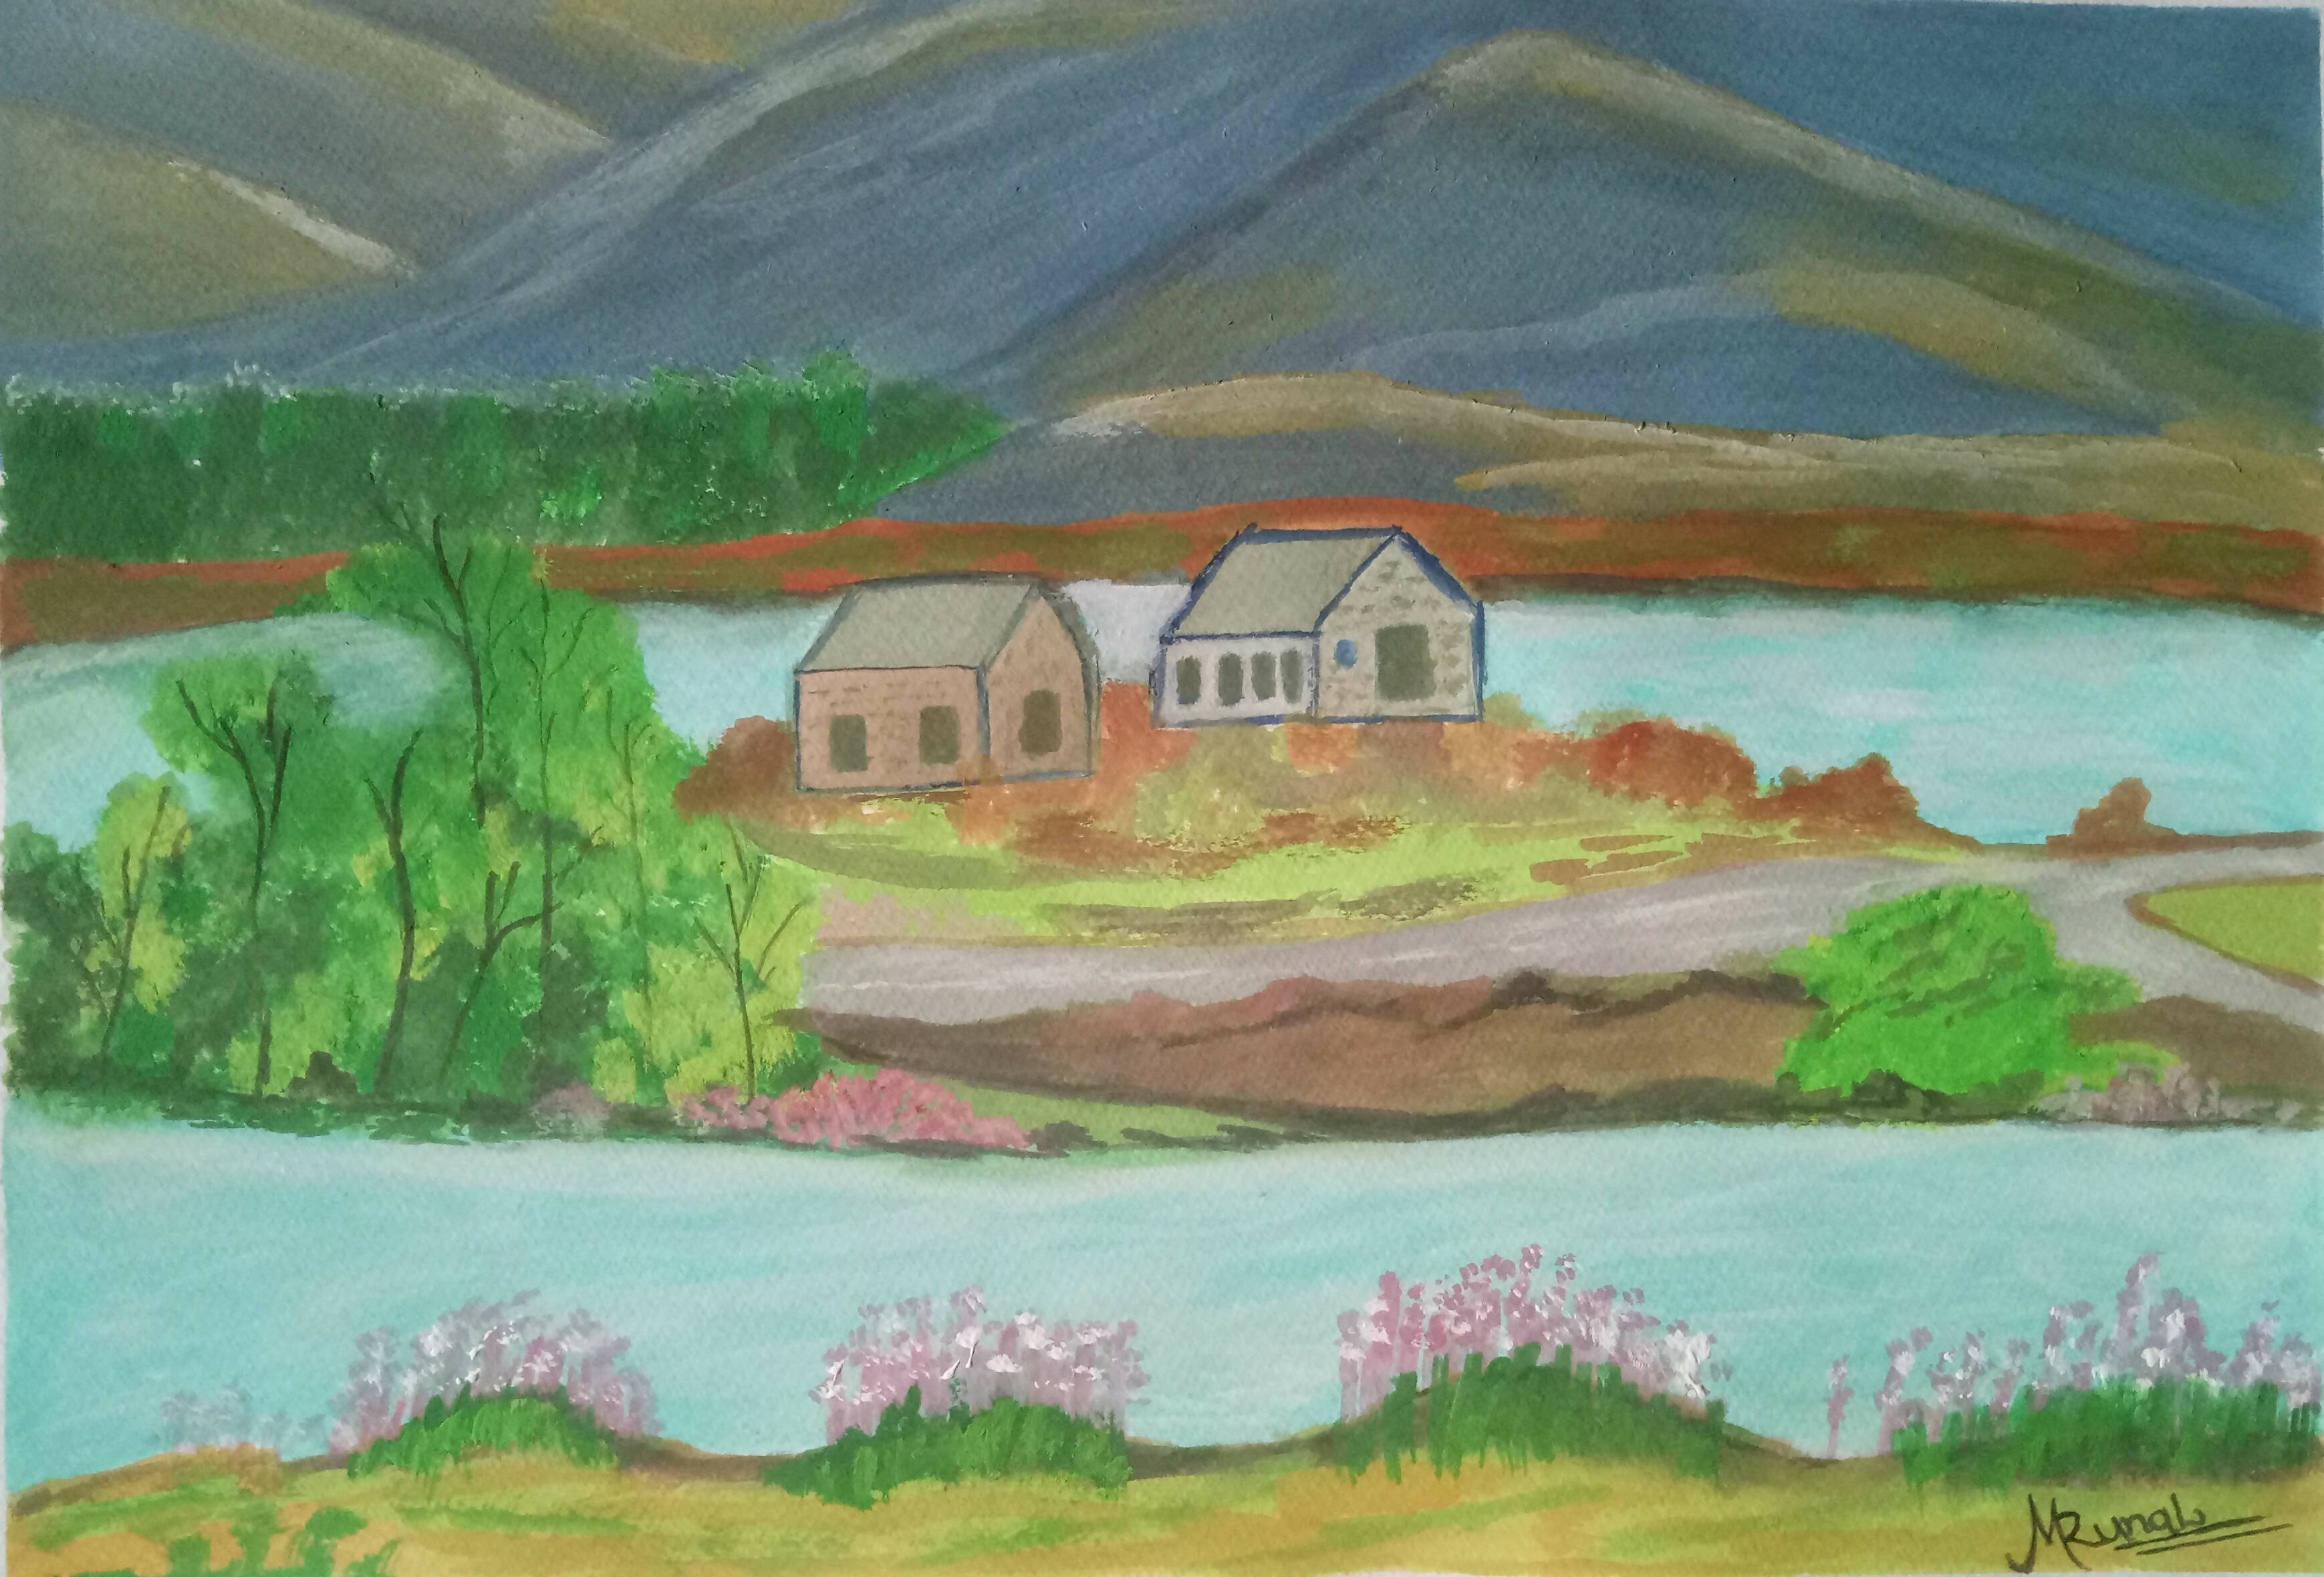 Beautiful Hill Drawing and Scenery For Kids - Kids Art & Craft